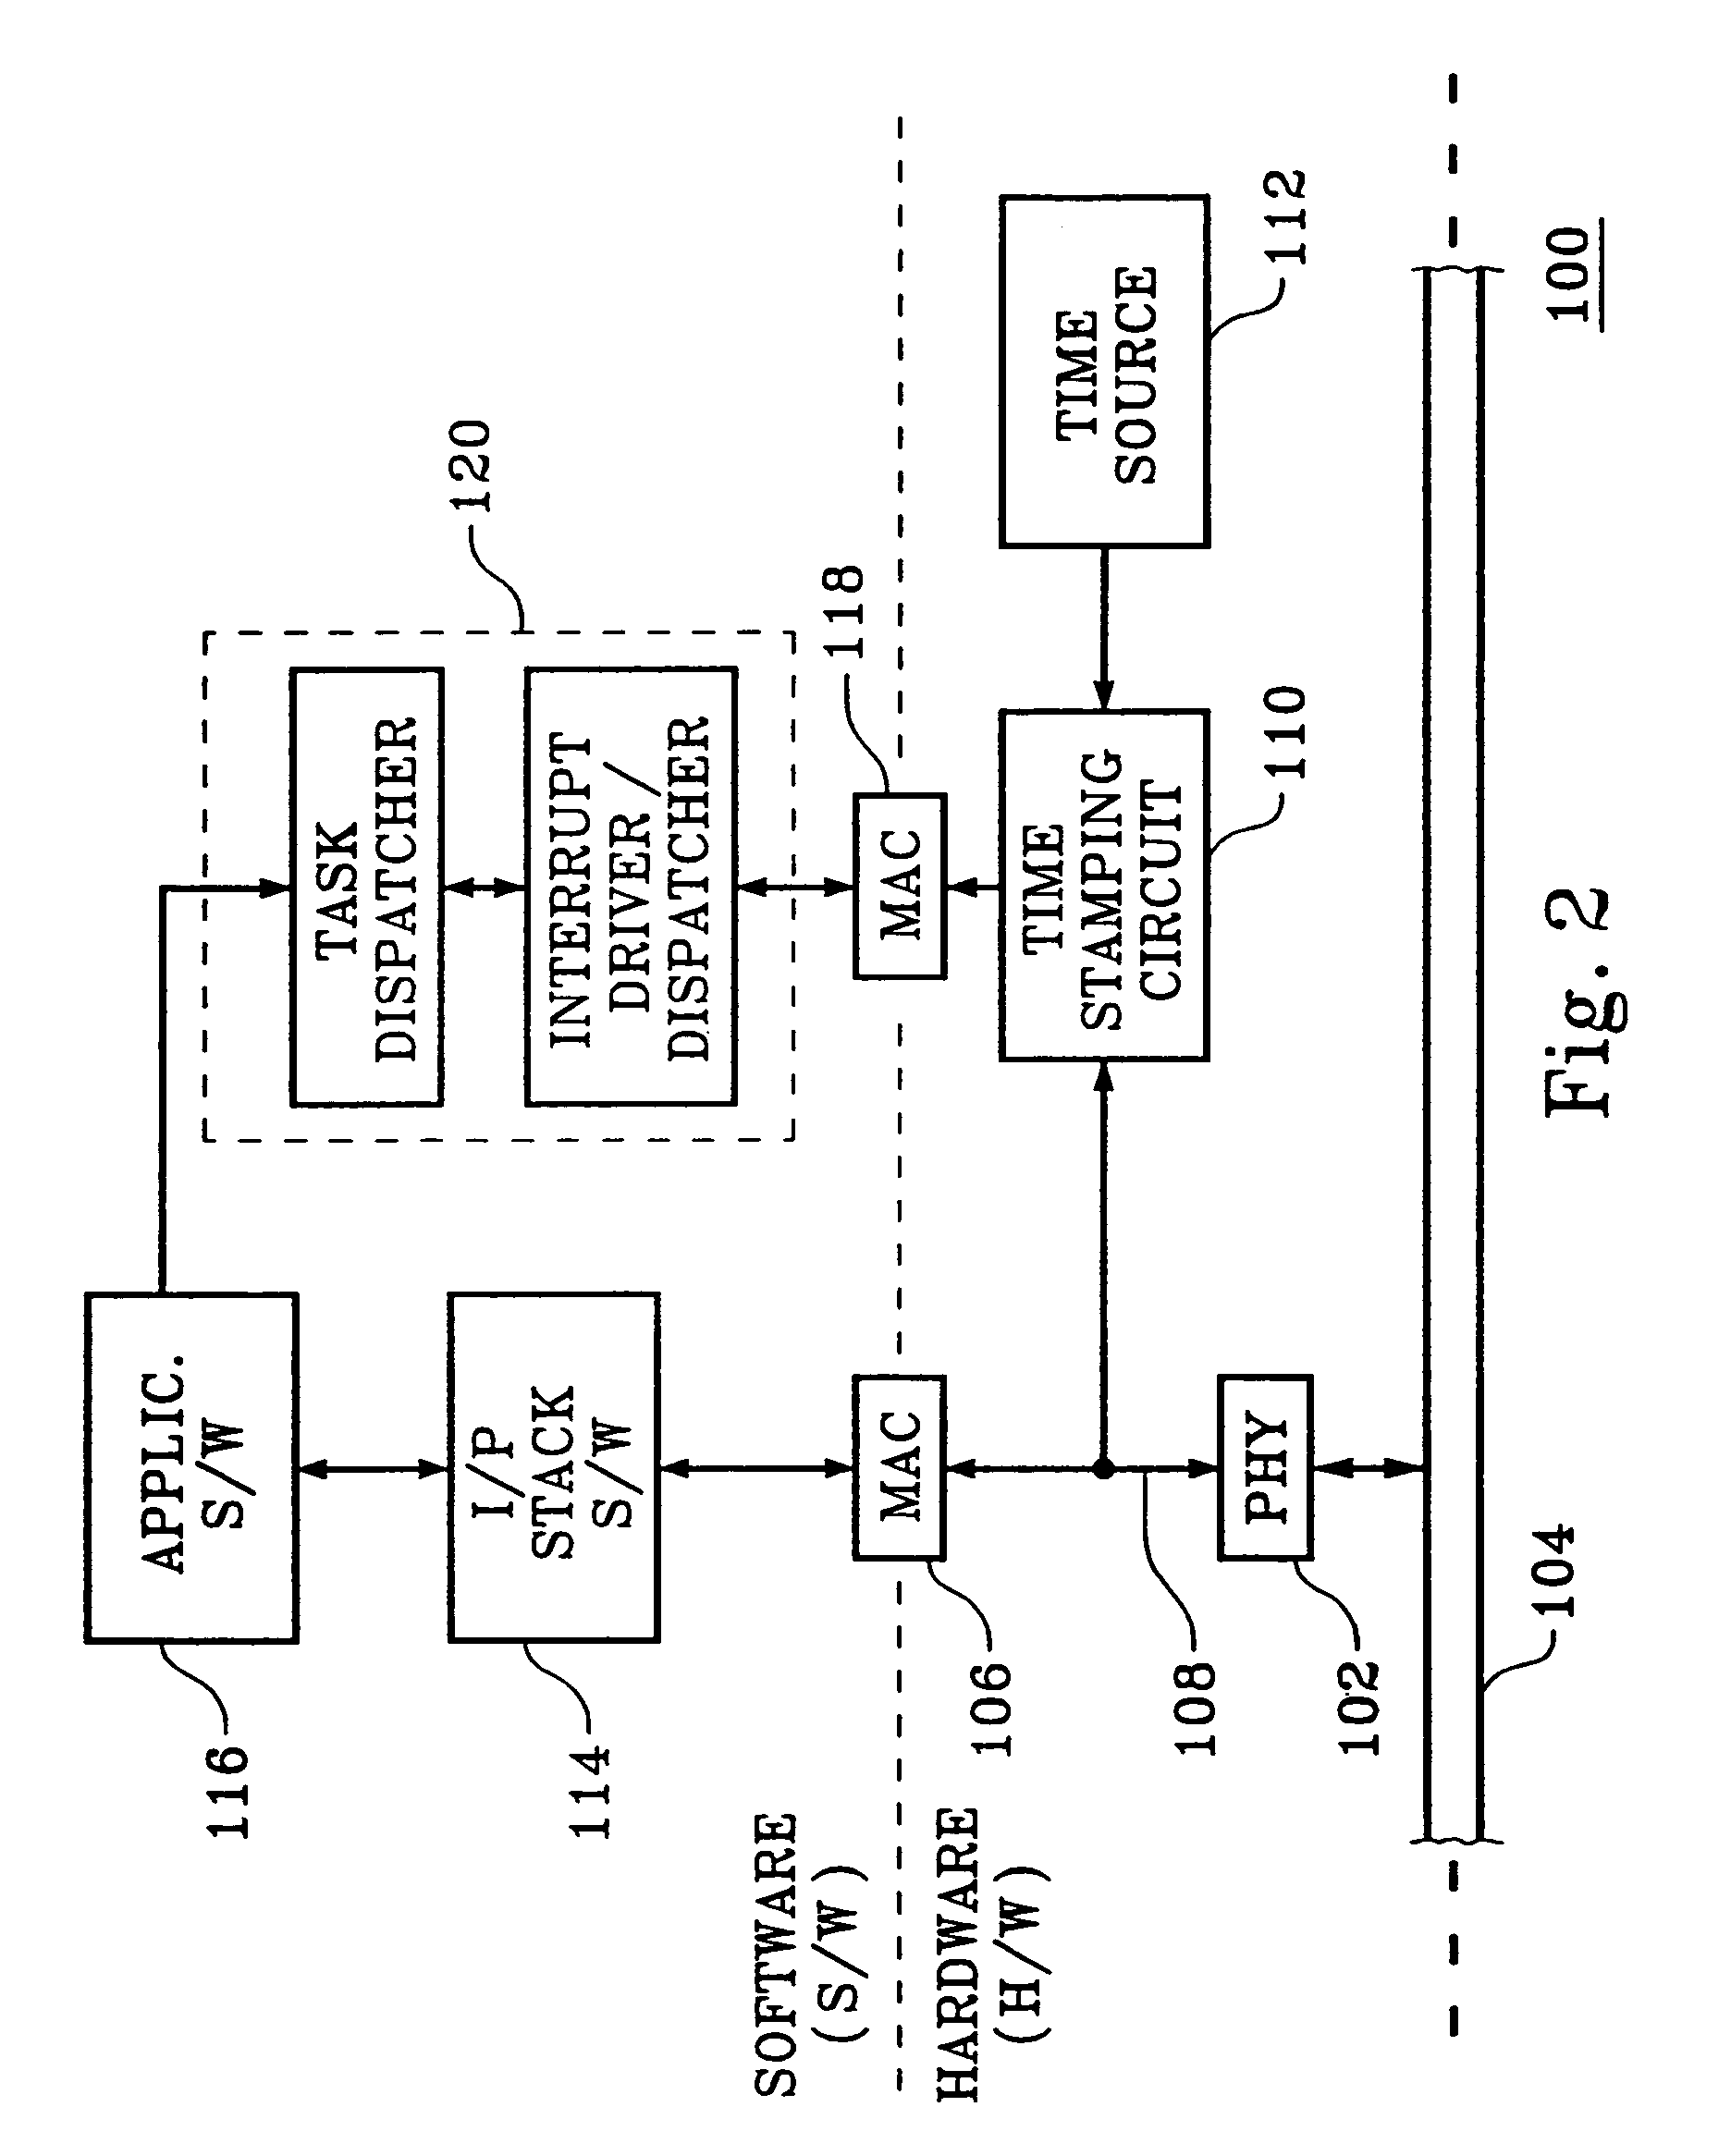 Hardware time stamping and registration of packetized data method and system